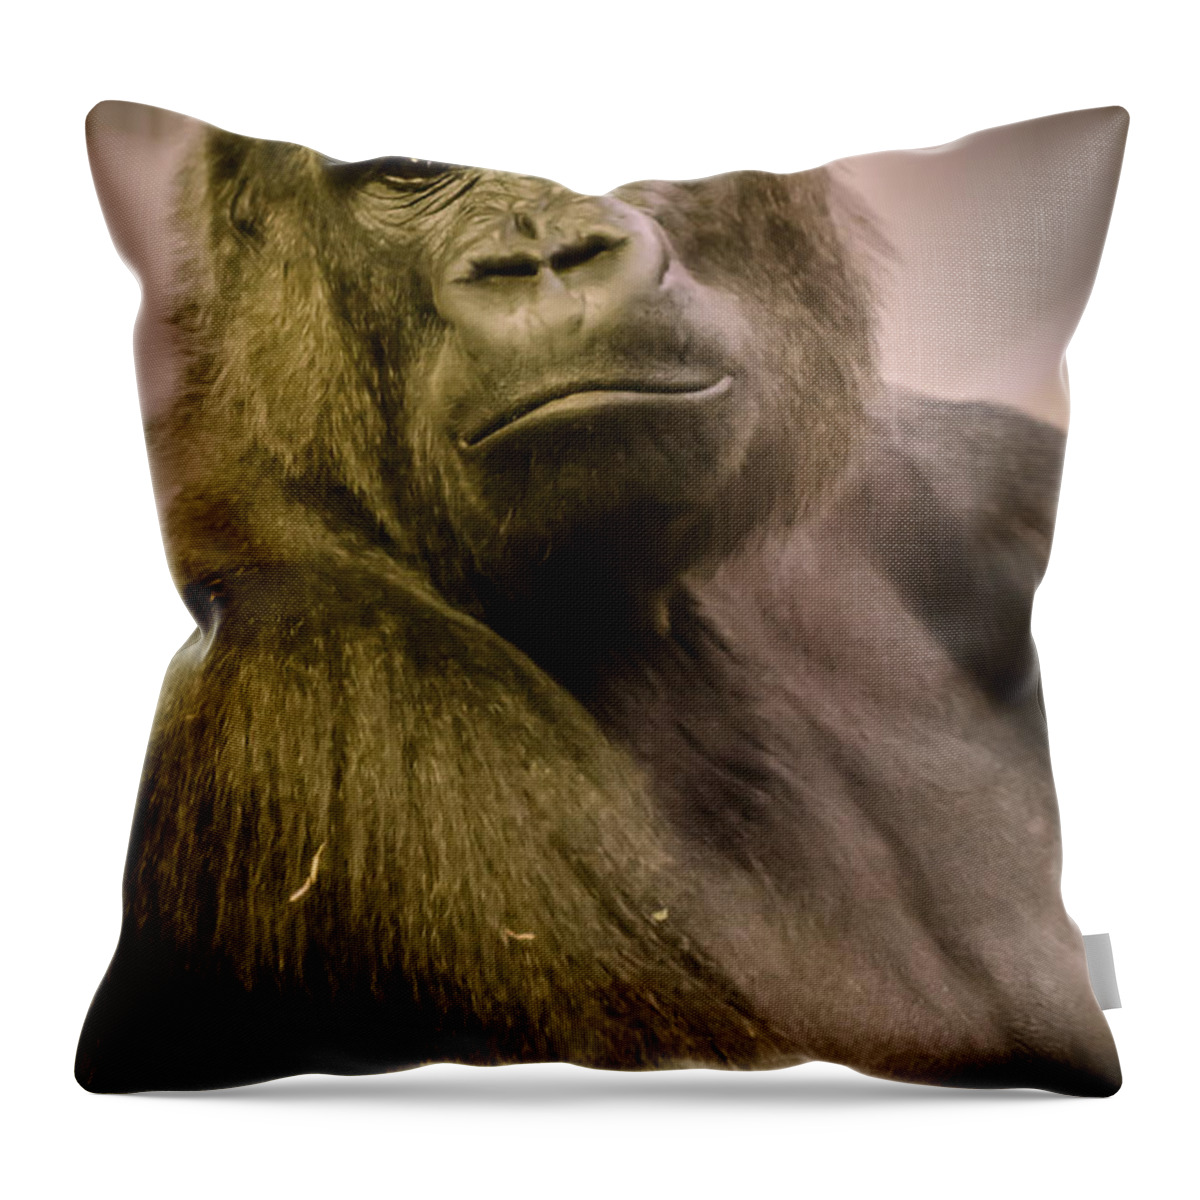 Gorilla Throw Pillow featuring the photograph So Like Us by Heather Applegate